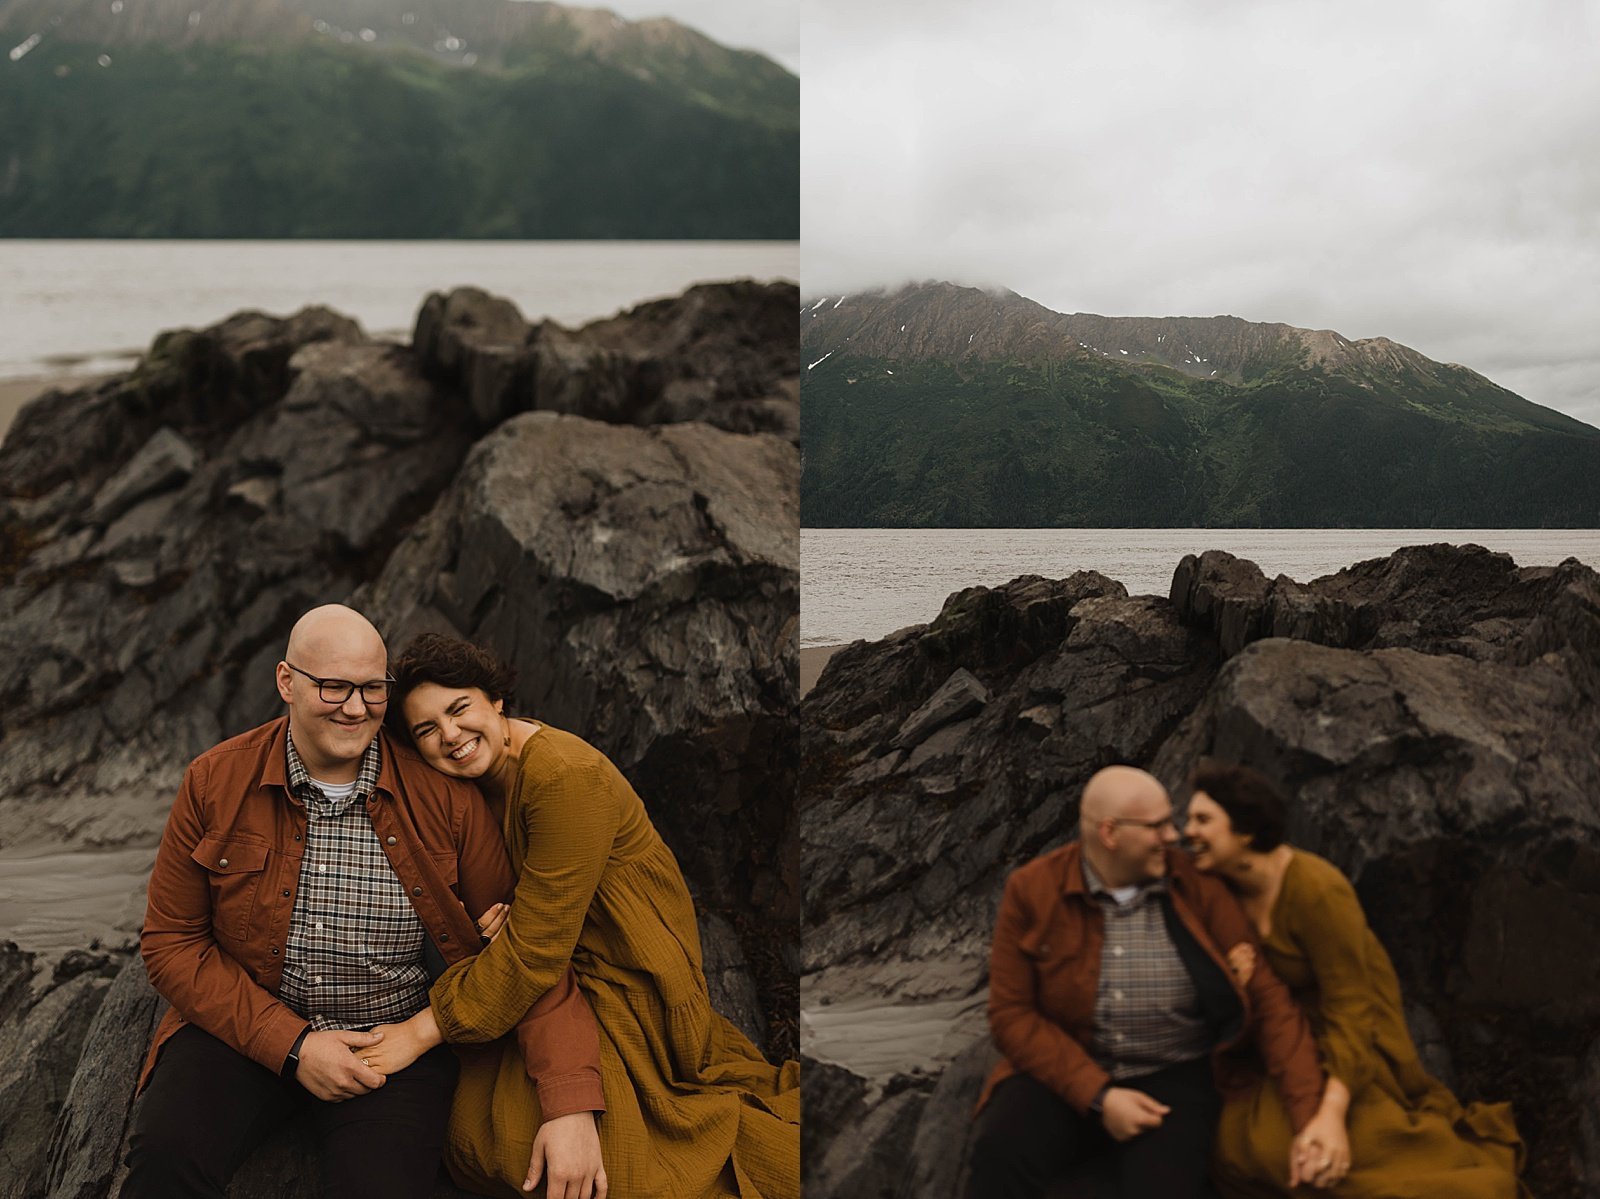  Woman snuggling on her husband’s shoulder with Alaska mountains and a lake in the background.  